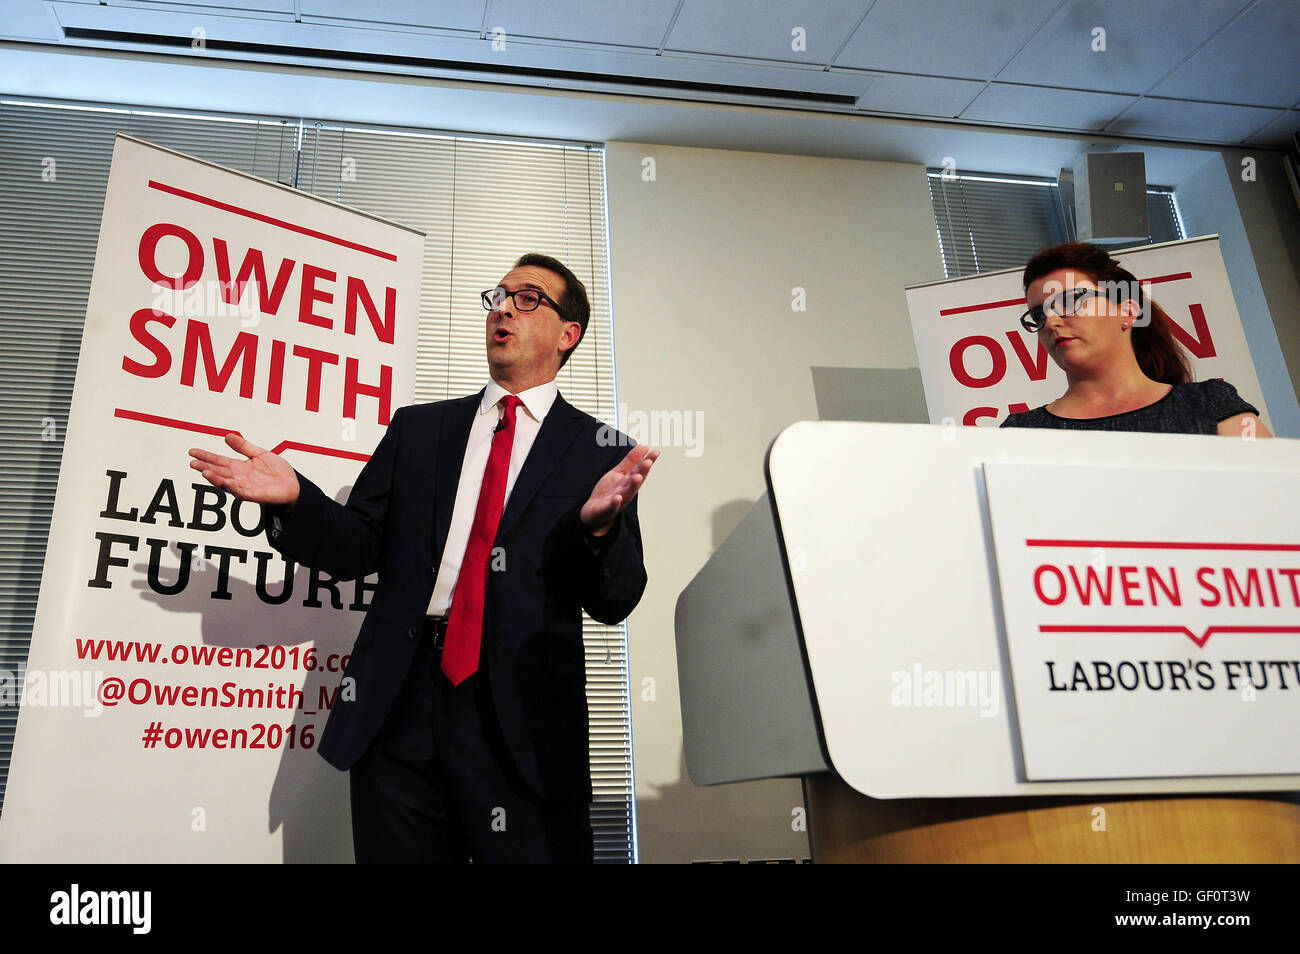 Labour leadership contender Owen Smith speaks at the Knowledge Transfer Centre in Catcliffe, South Yorkshire, where he committed himself to greater equality at work, announcing plans to appoint a cabinet-level minister to deliver fair employment. Stock Photo